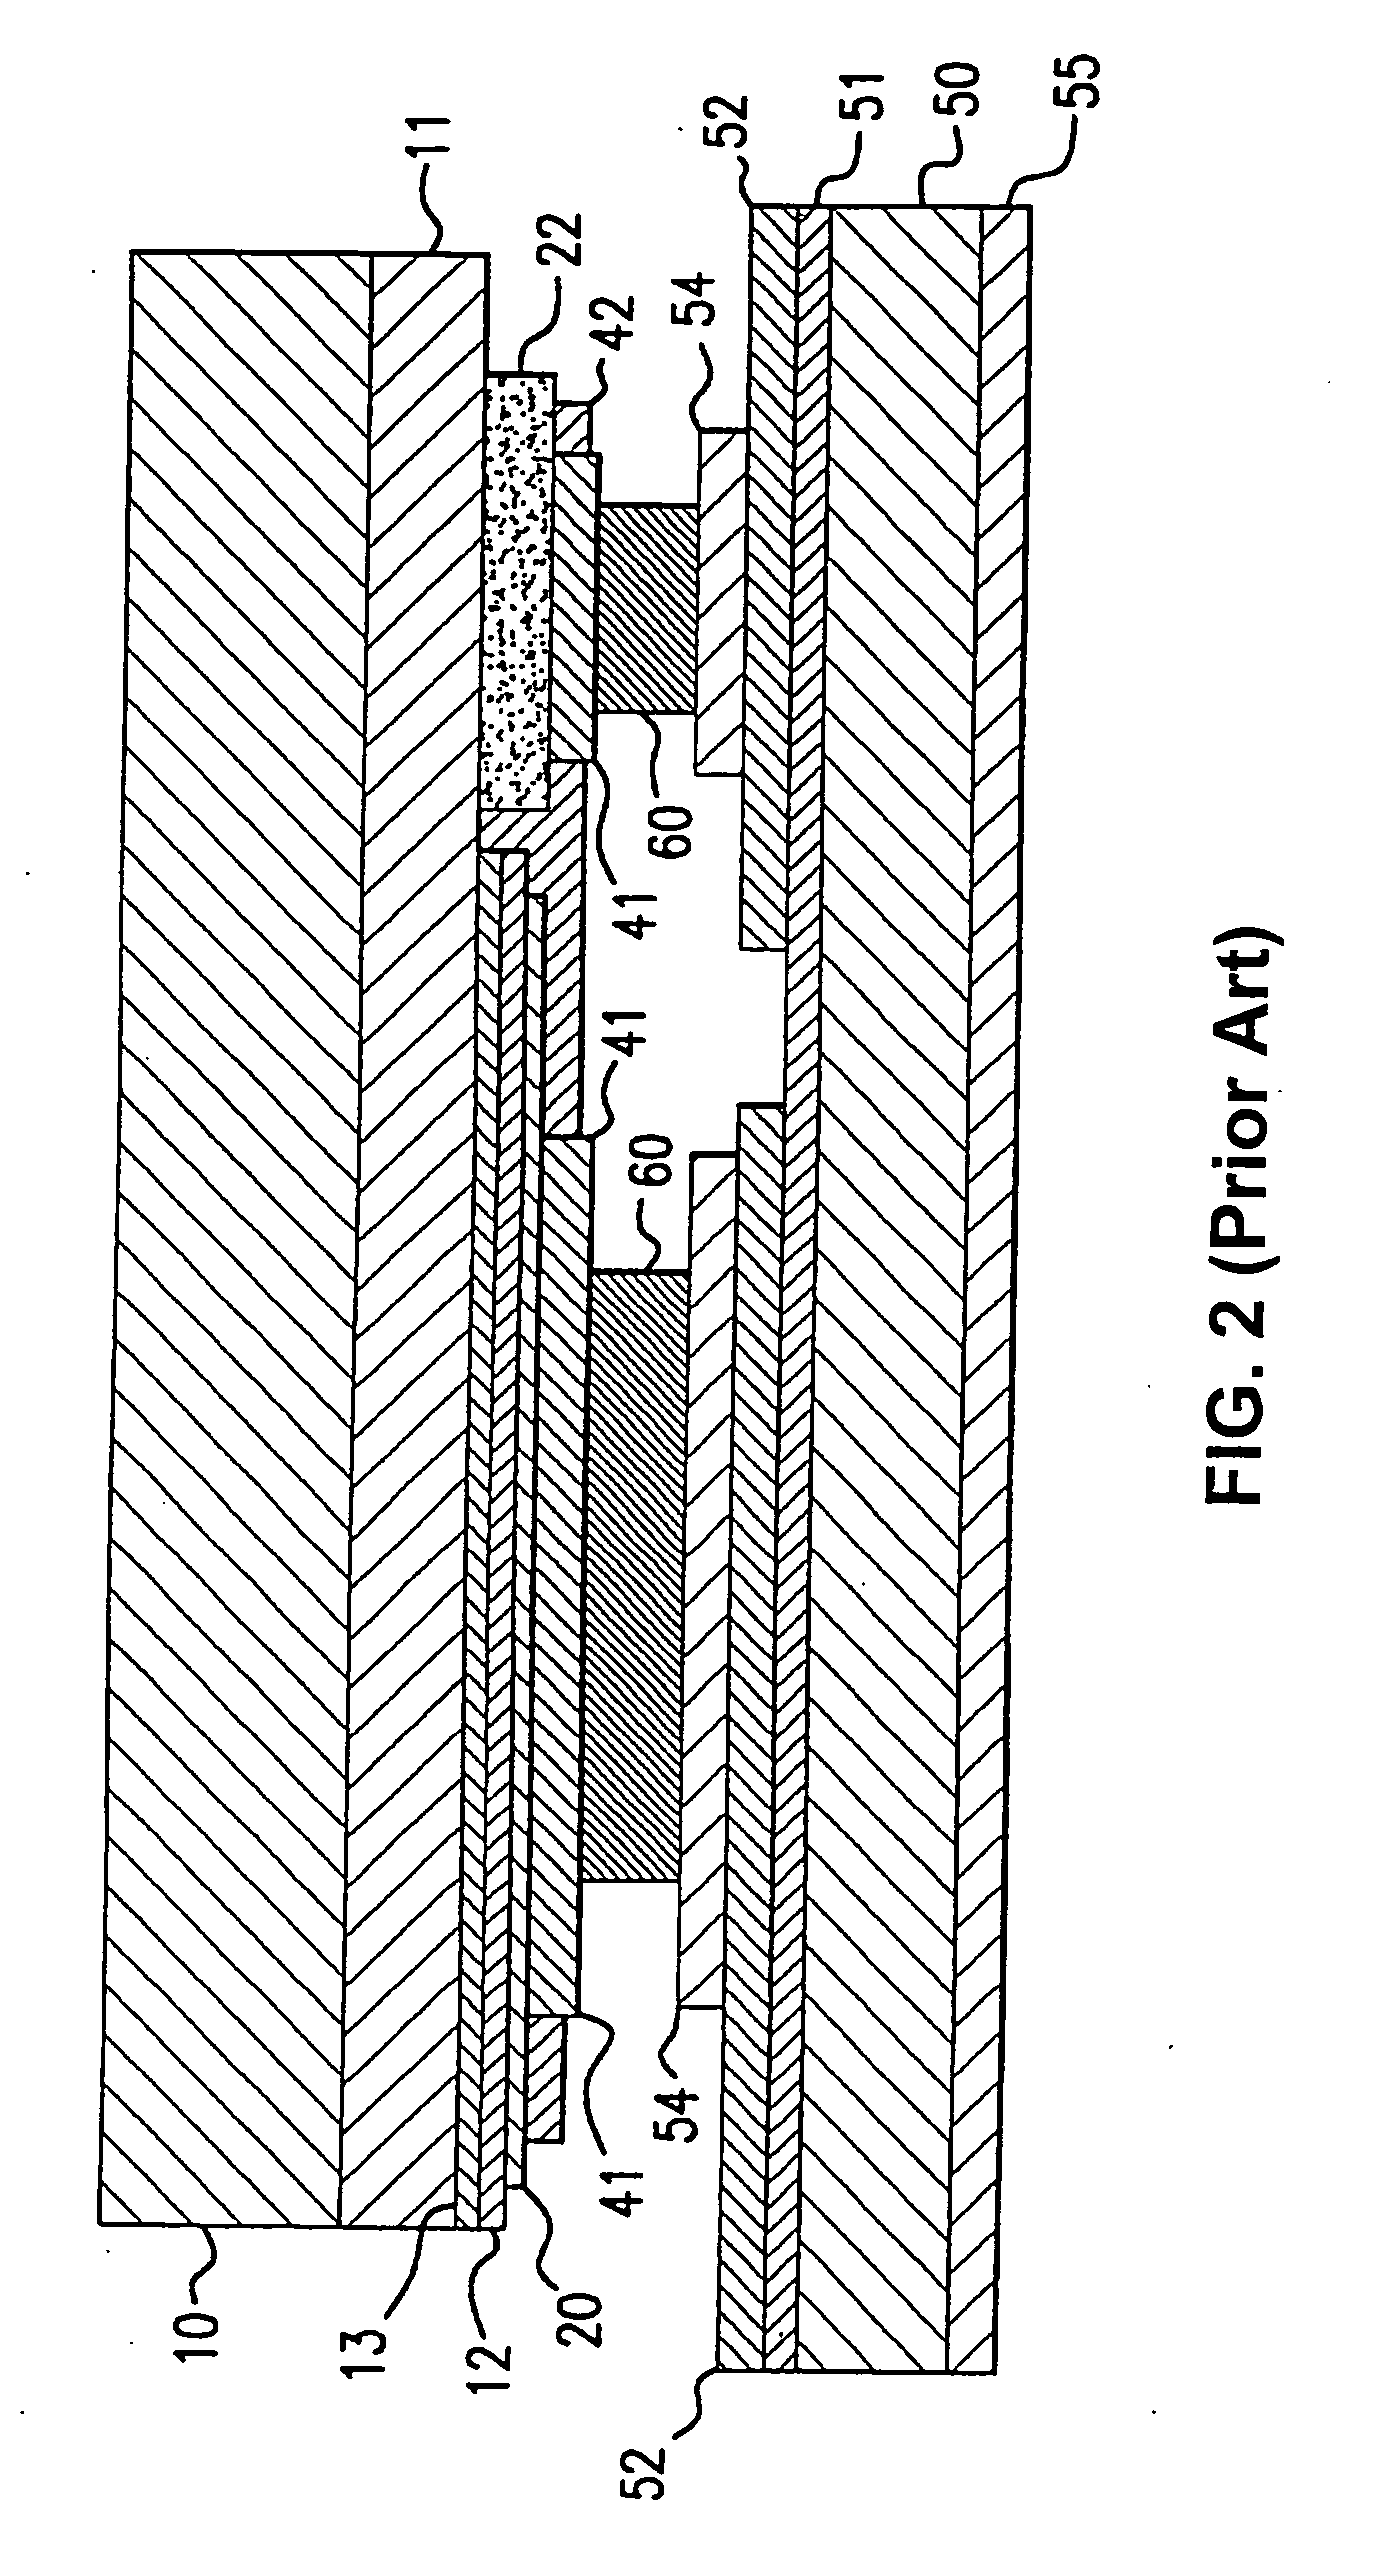 Interconnects for semiconductor light emitting devices